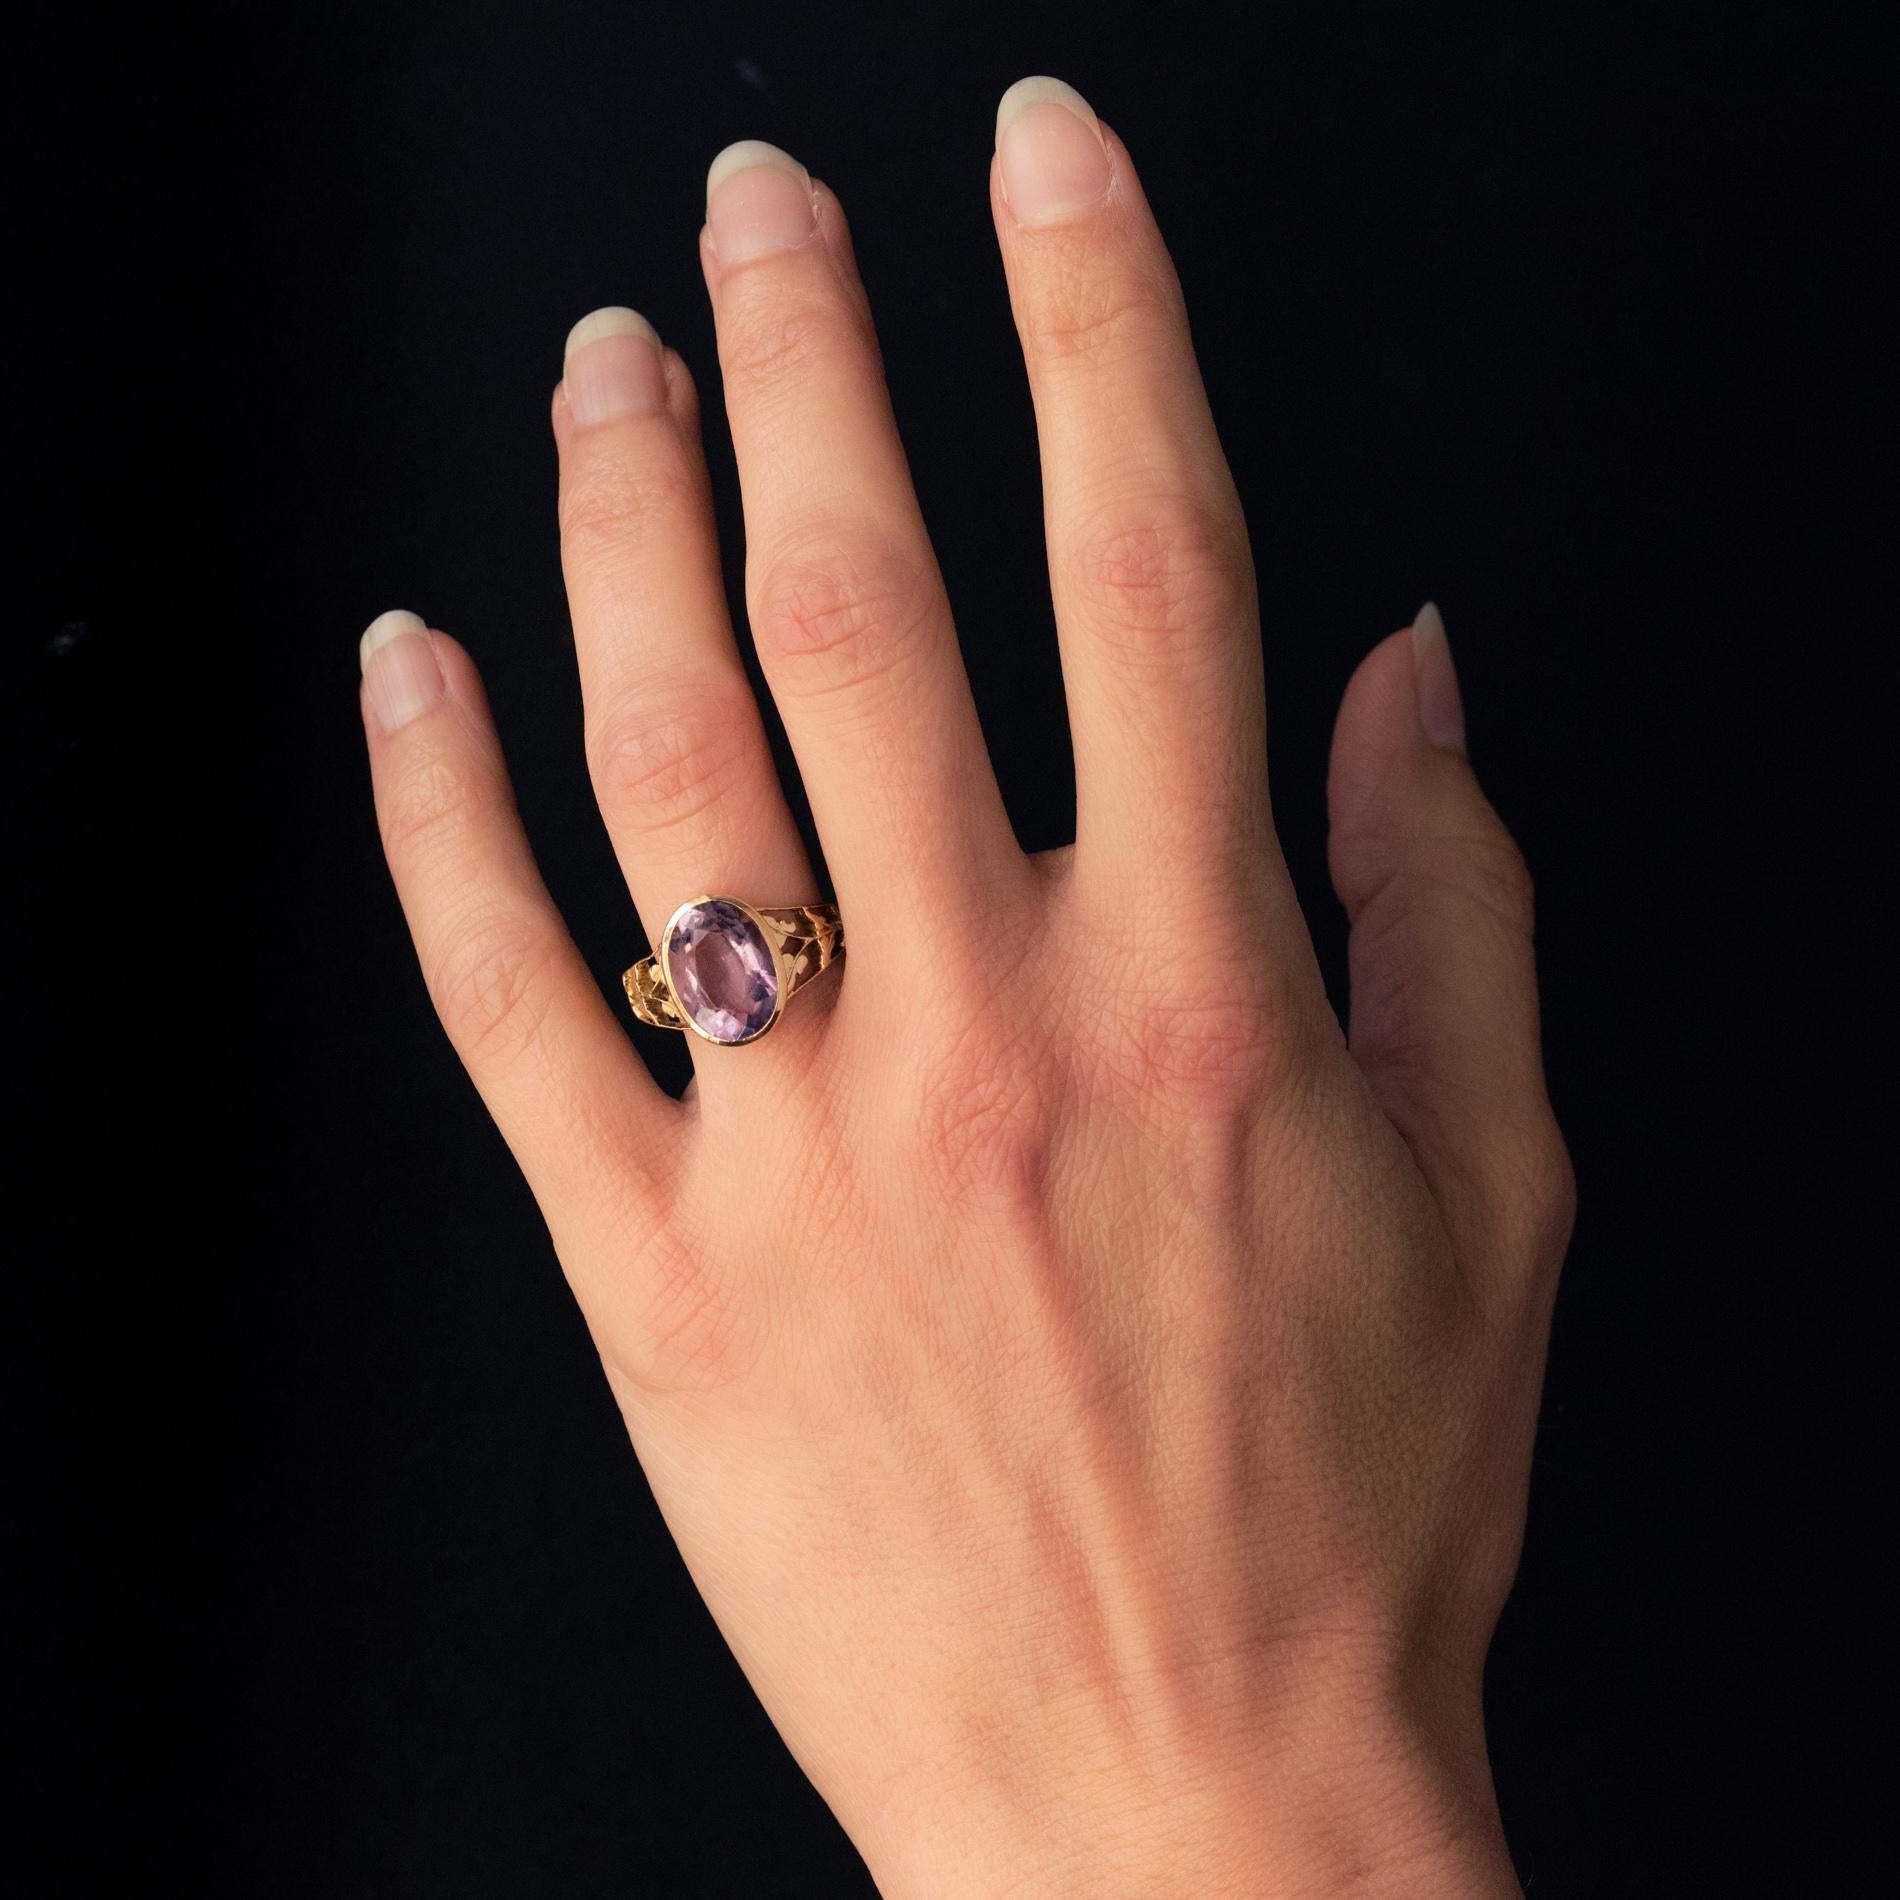 Ring in 18 karat yellow gold.
This antique ring is adorned on its top with a bezel-set amethyst, supported by openwork plant motifs on the start of the ring.
Height : 13.8 mm, Width : 10.5 mm, Thickness : 5.8 mm, Ring Width at Base: 2.7 mm.
Total